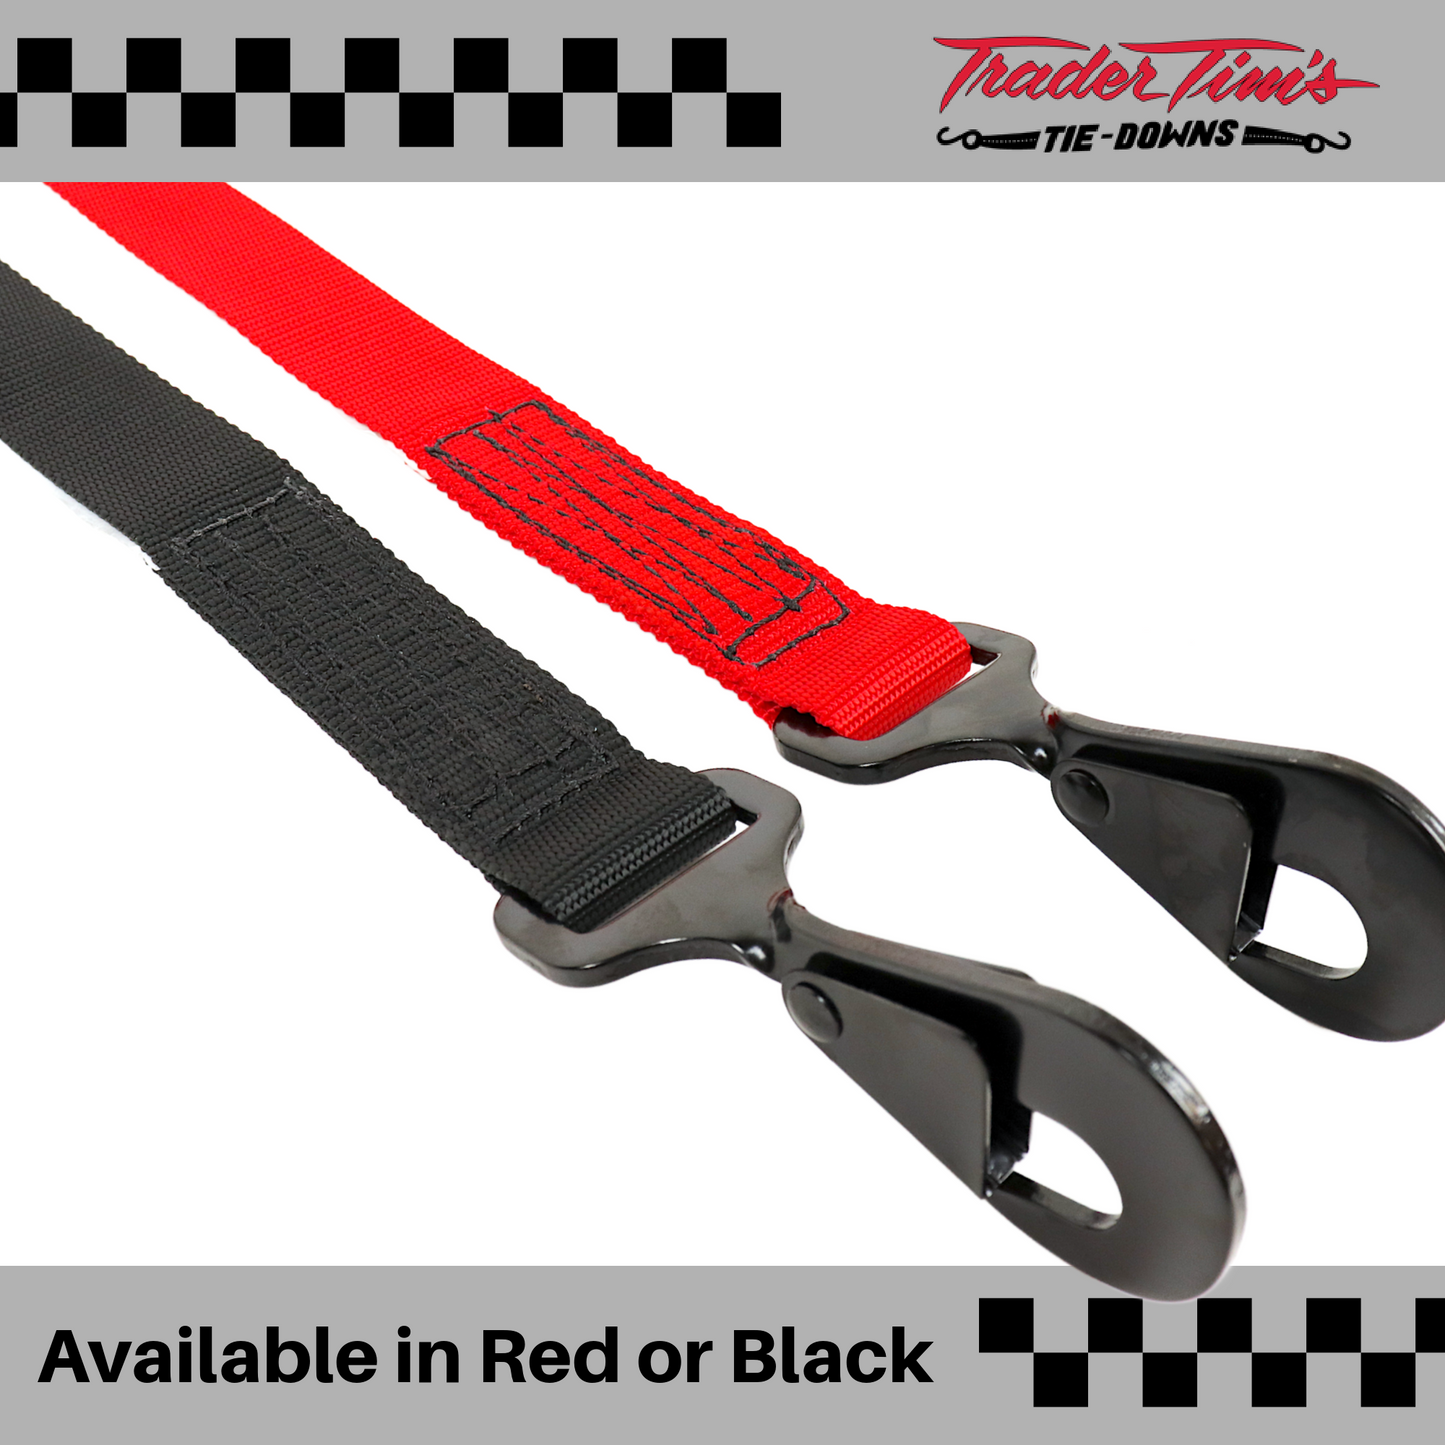 1.5" x 8' Through The Wheel Tie-Down - Red or Black